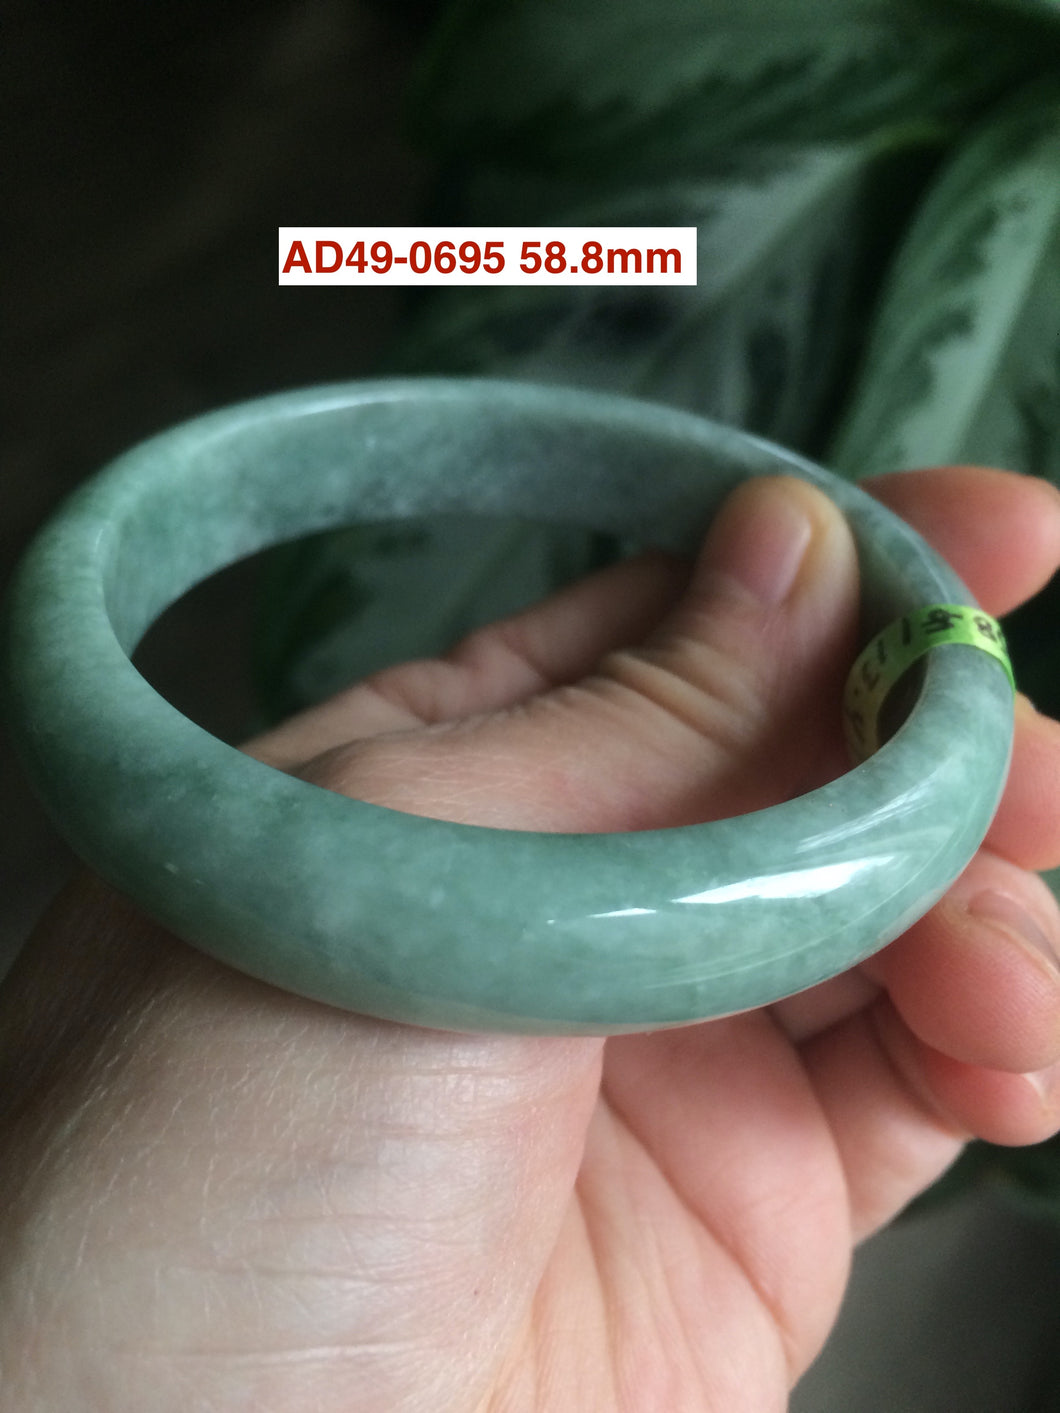 58-59mm certifaied Type A 100% Natural bean green/black Jadeite Jade bangle (with defects) Group AD49